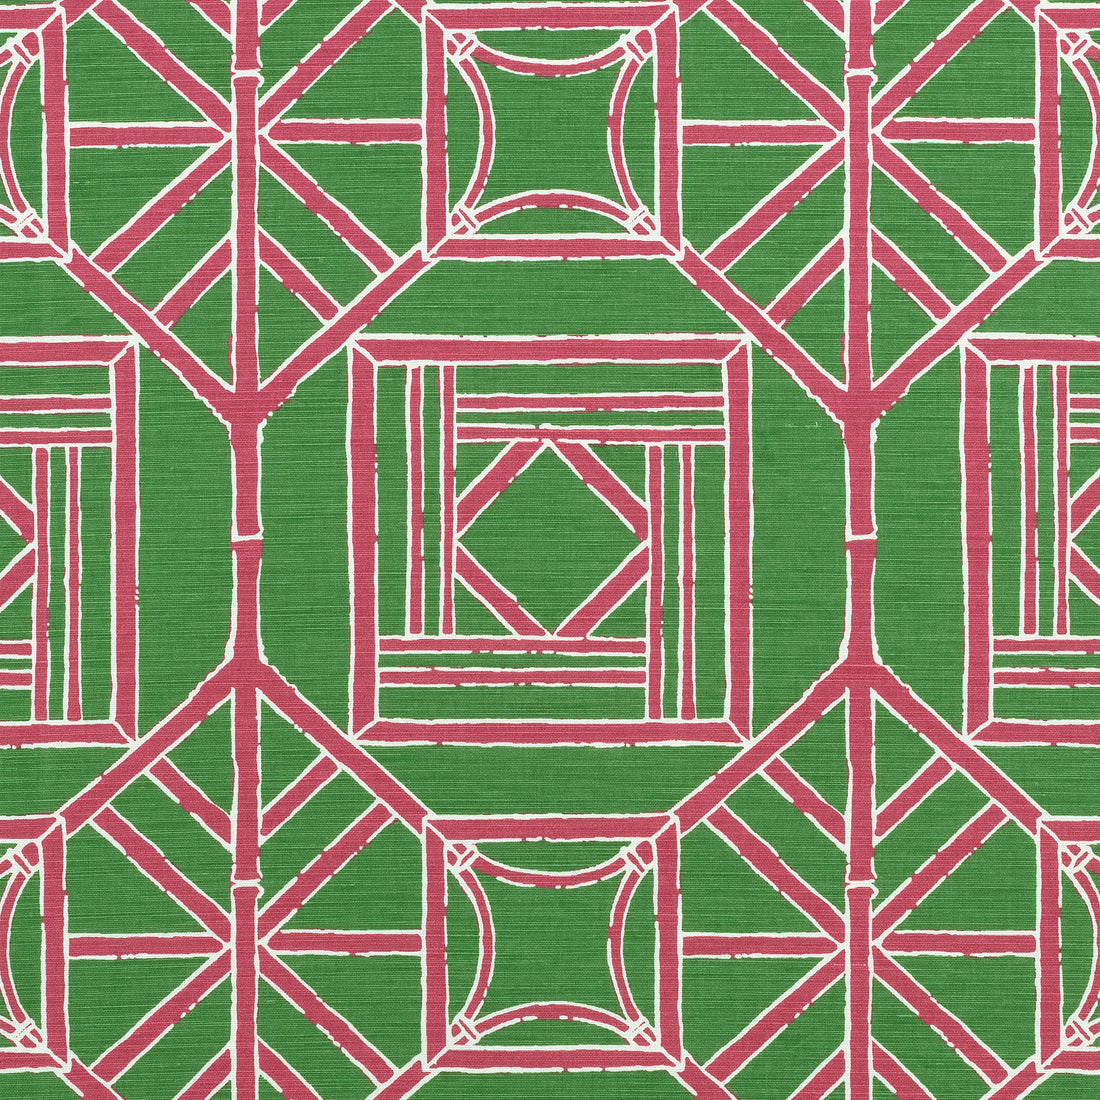 Shoji Panel fabric in green and pink color - pattern number F975517 - by Thibaut in the Dynasty collection